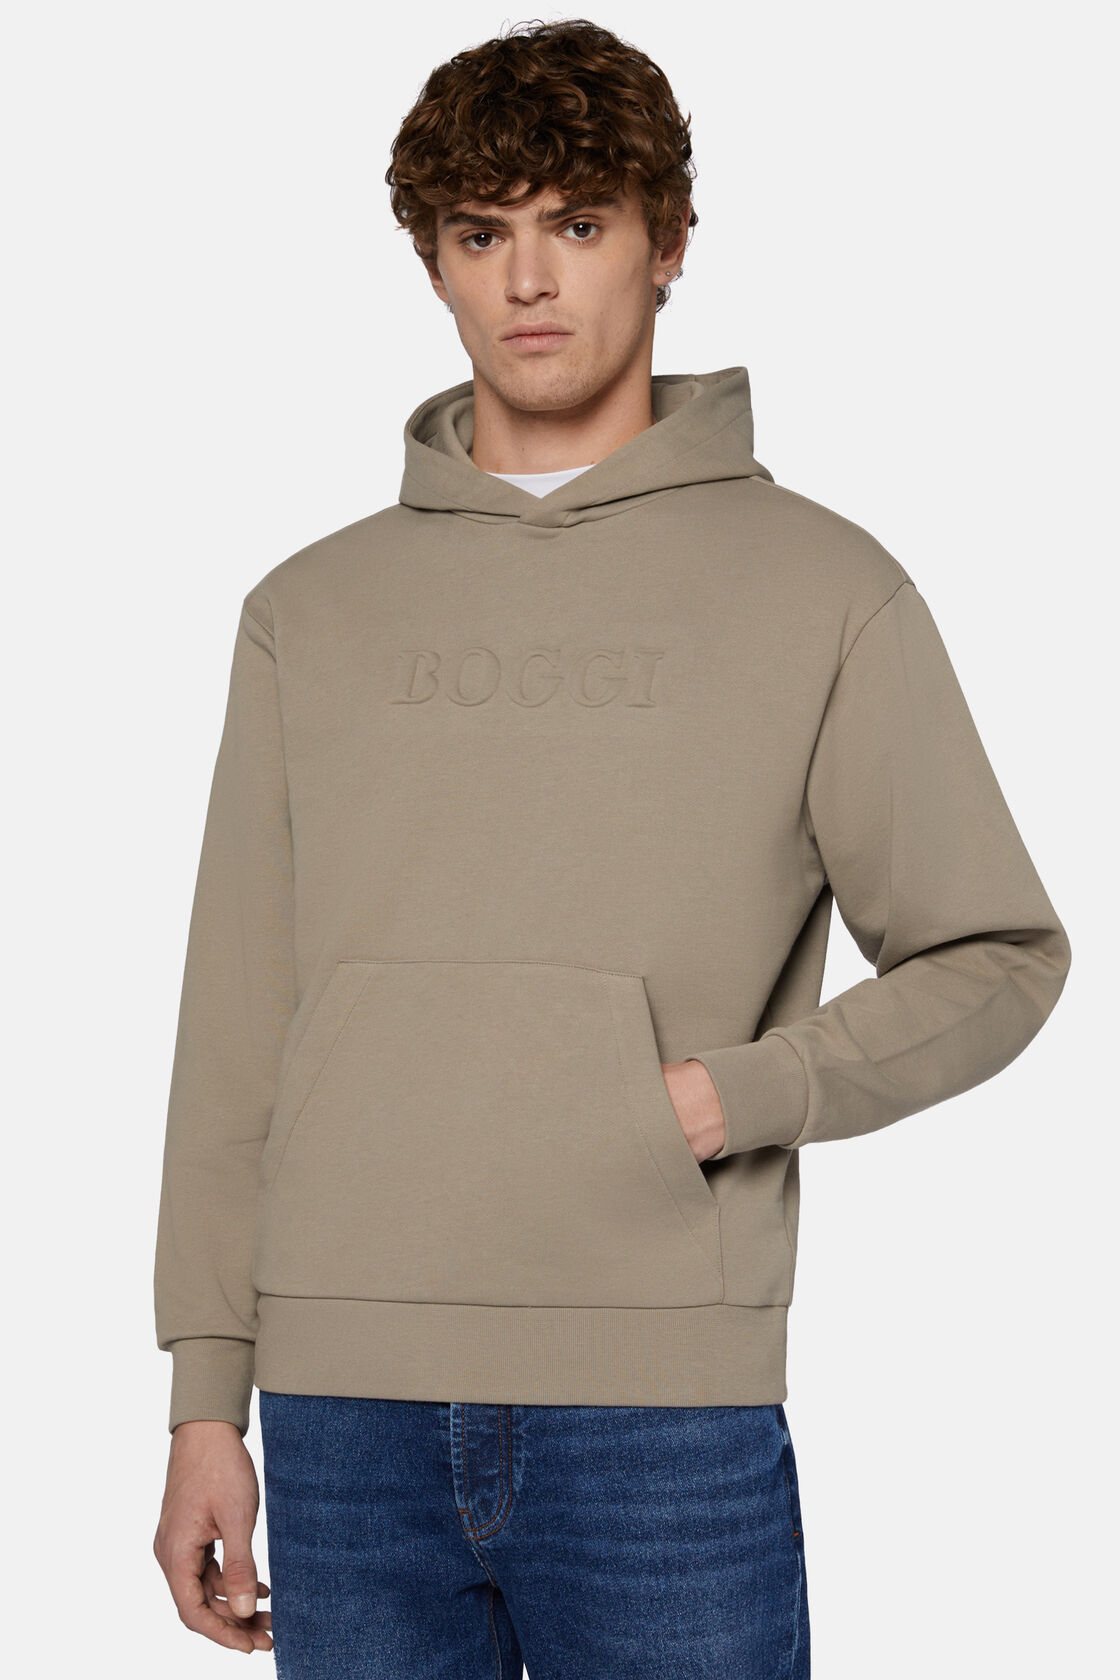 Hooded Sweatshirt in Cotton, Taupe, hi-res